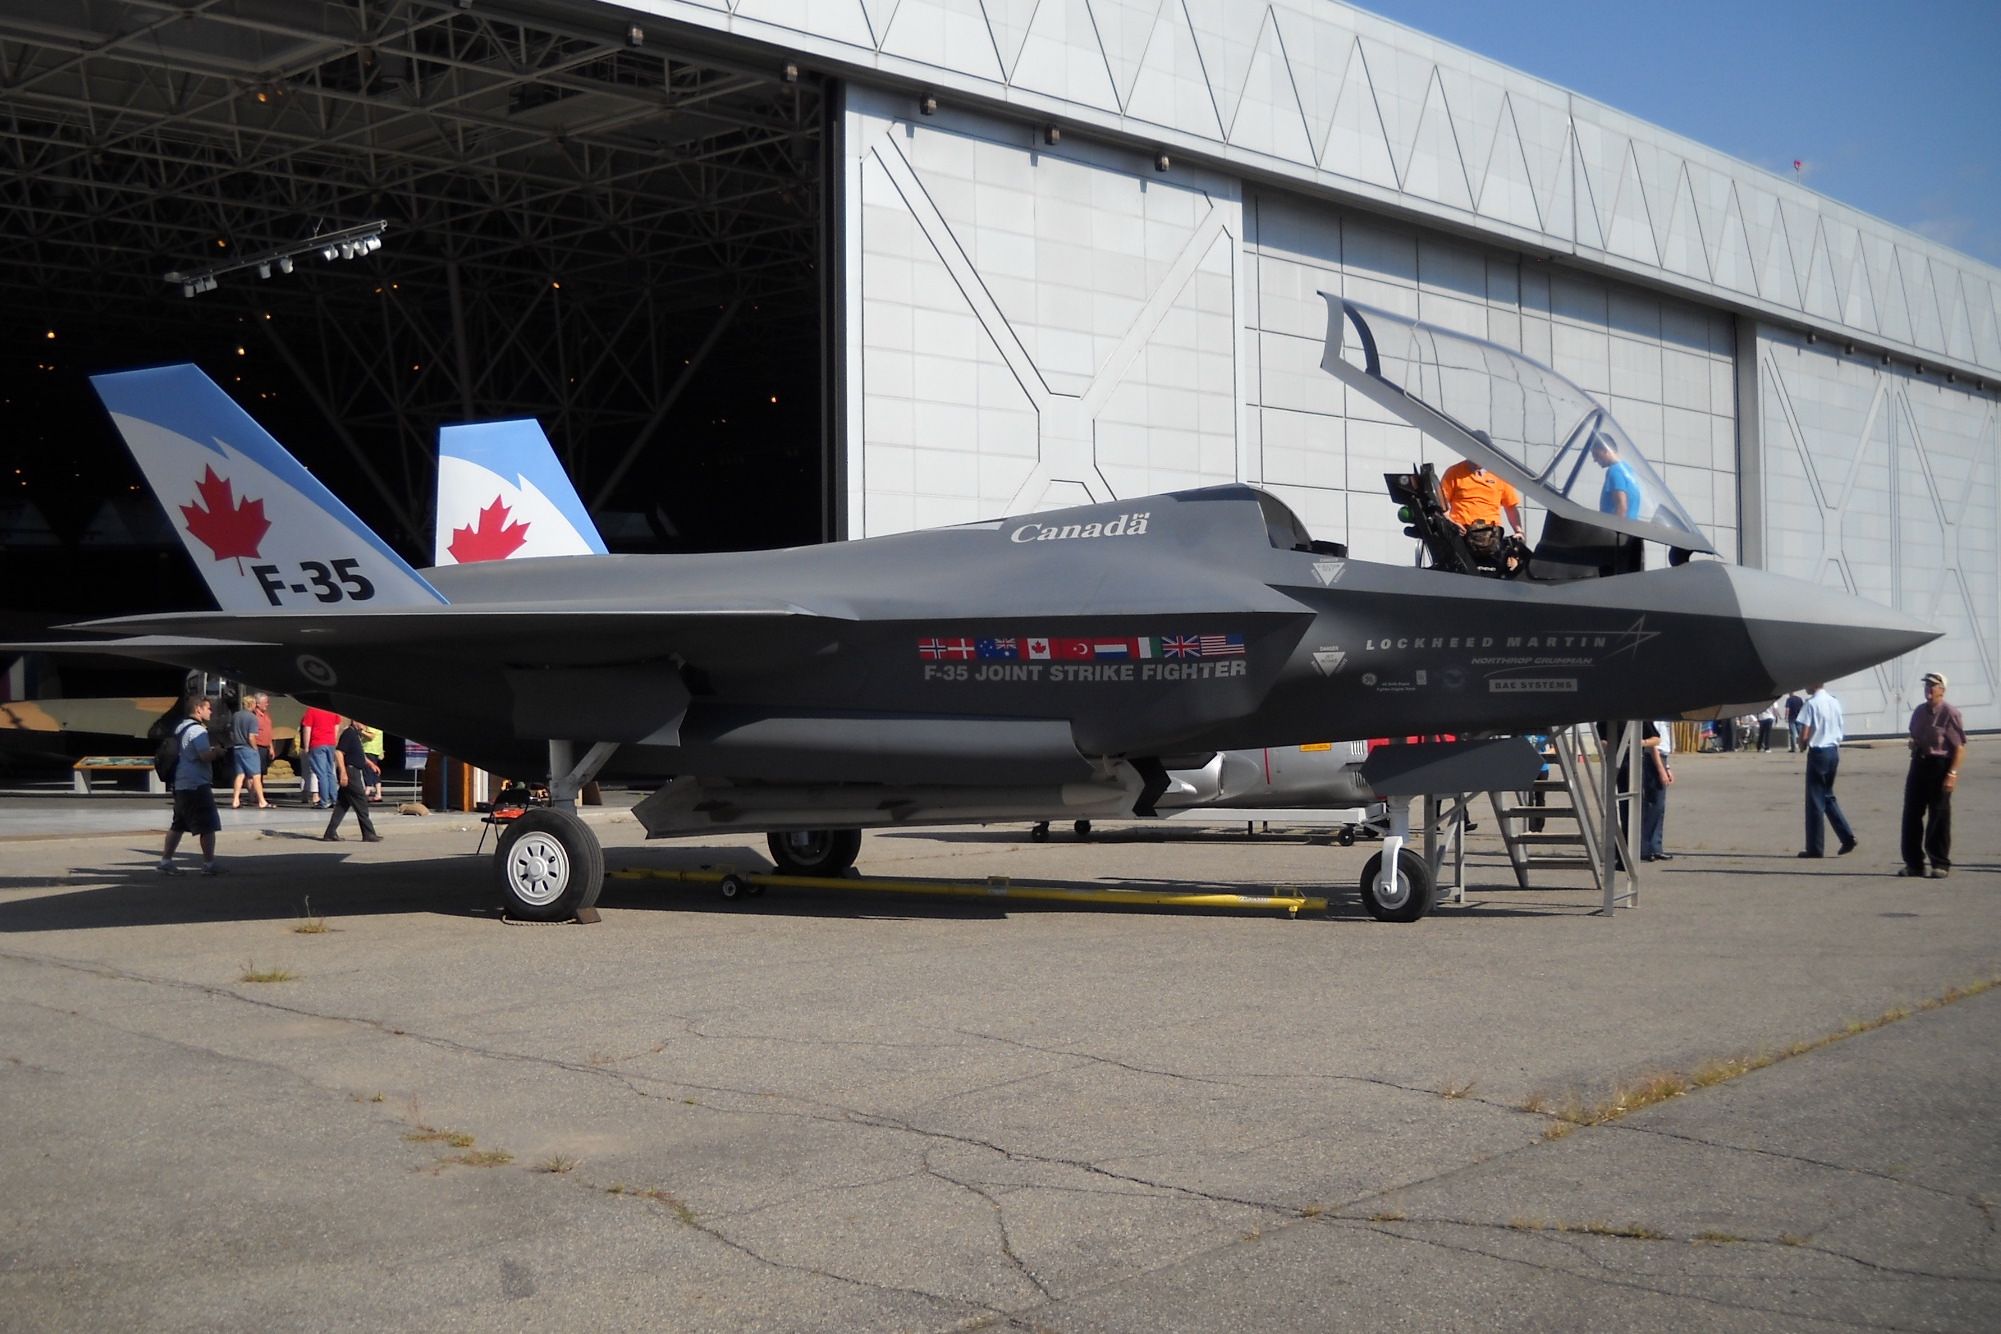 A RCAF F-35 Lightning II parked outside a hangar.